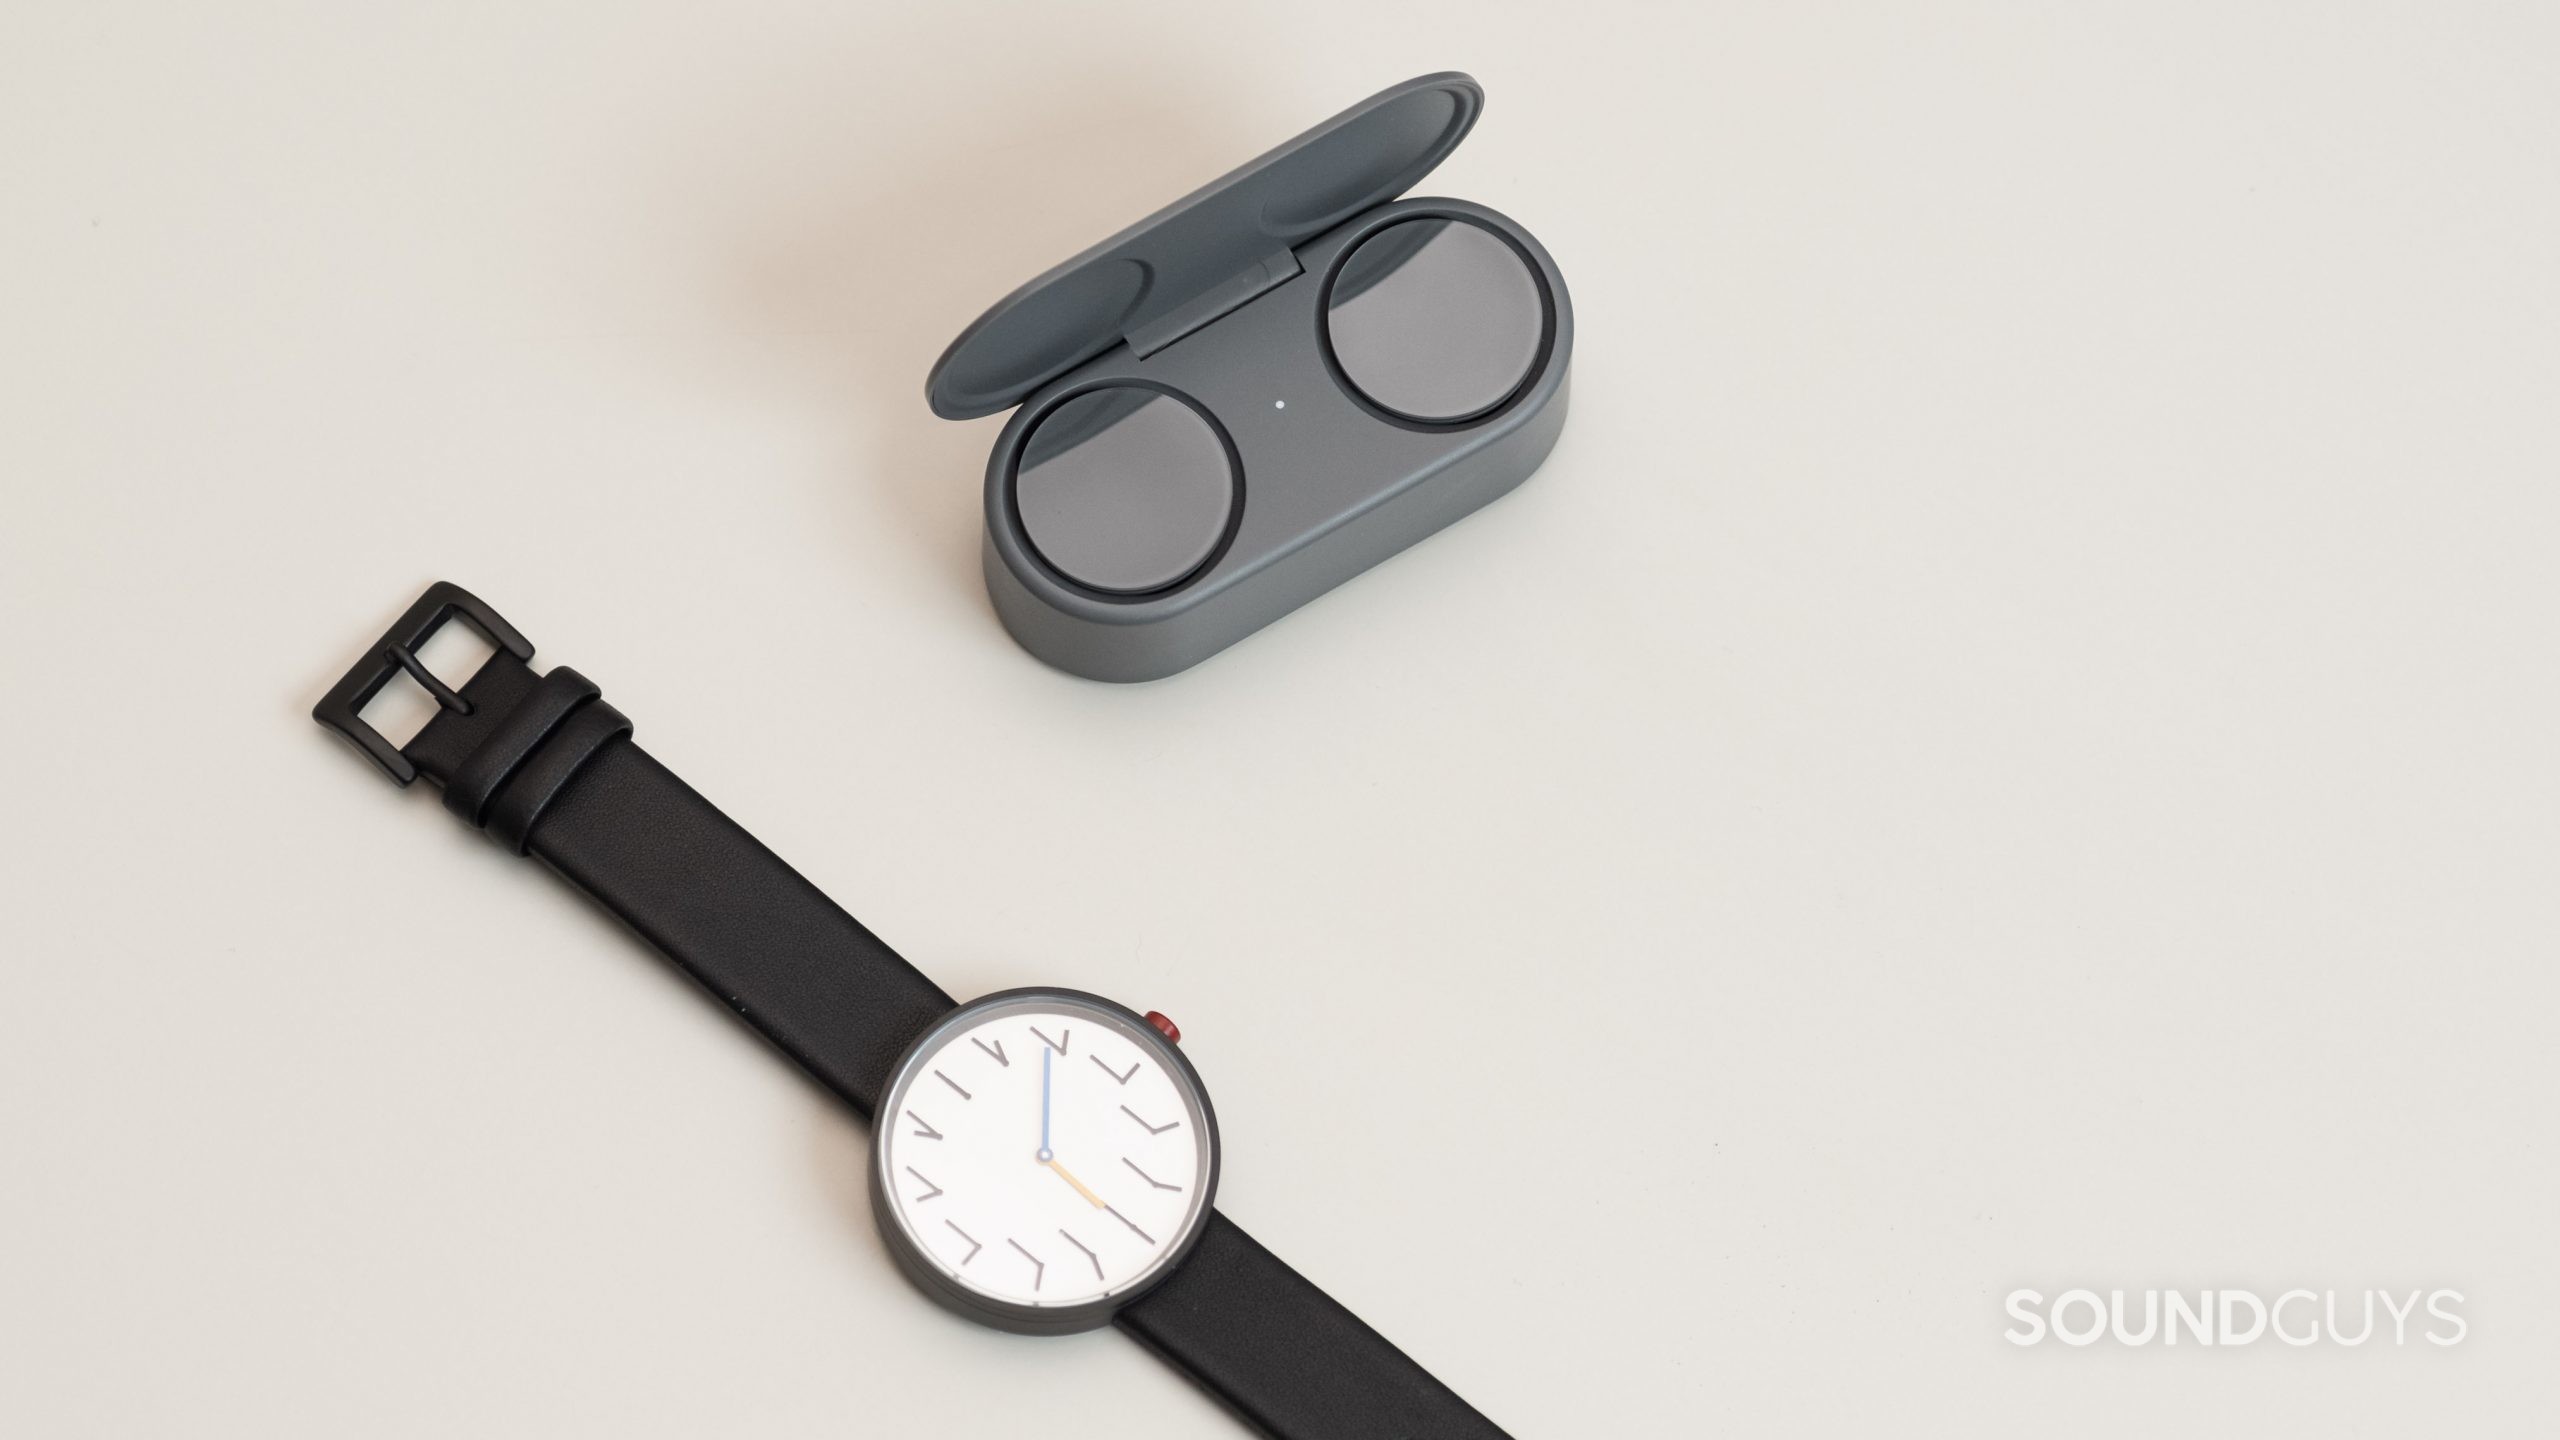 The Microsoft Surface Earbuds open case next to a watch on an off-white surface.